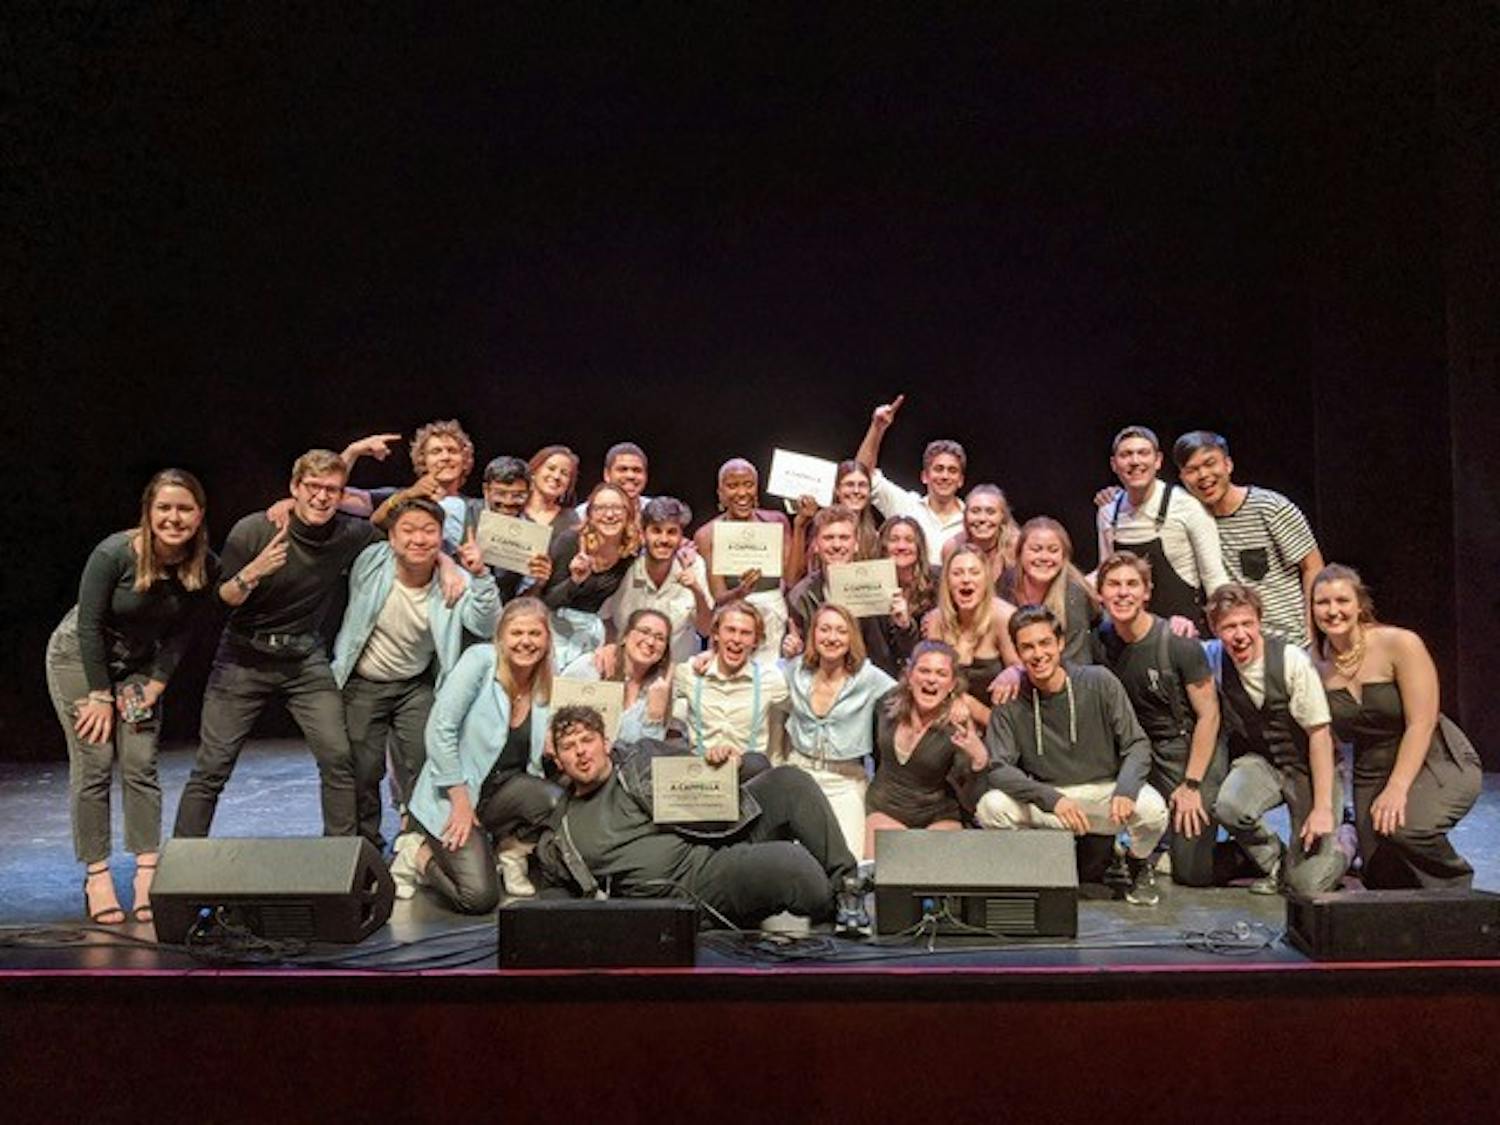 Two co-ed UNC a cappella groups, The Tarpeggios and Tar Heel Voices, placed first and second, respectively, at the International Championship of Collegiate A Cappella South Region quarterfinals on Feb. 1. Photo courtesy of Lauren Gornto.